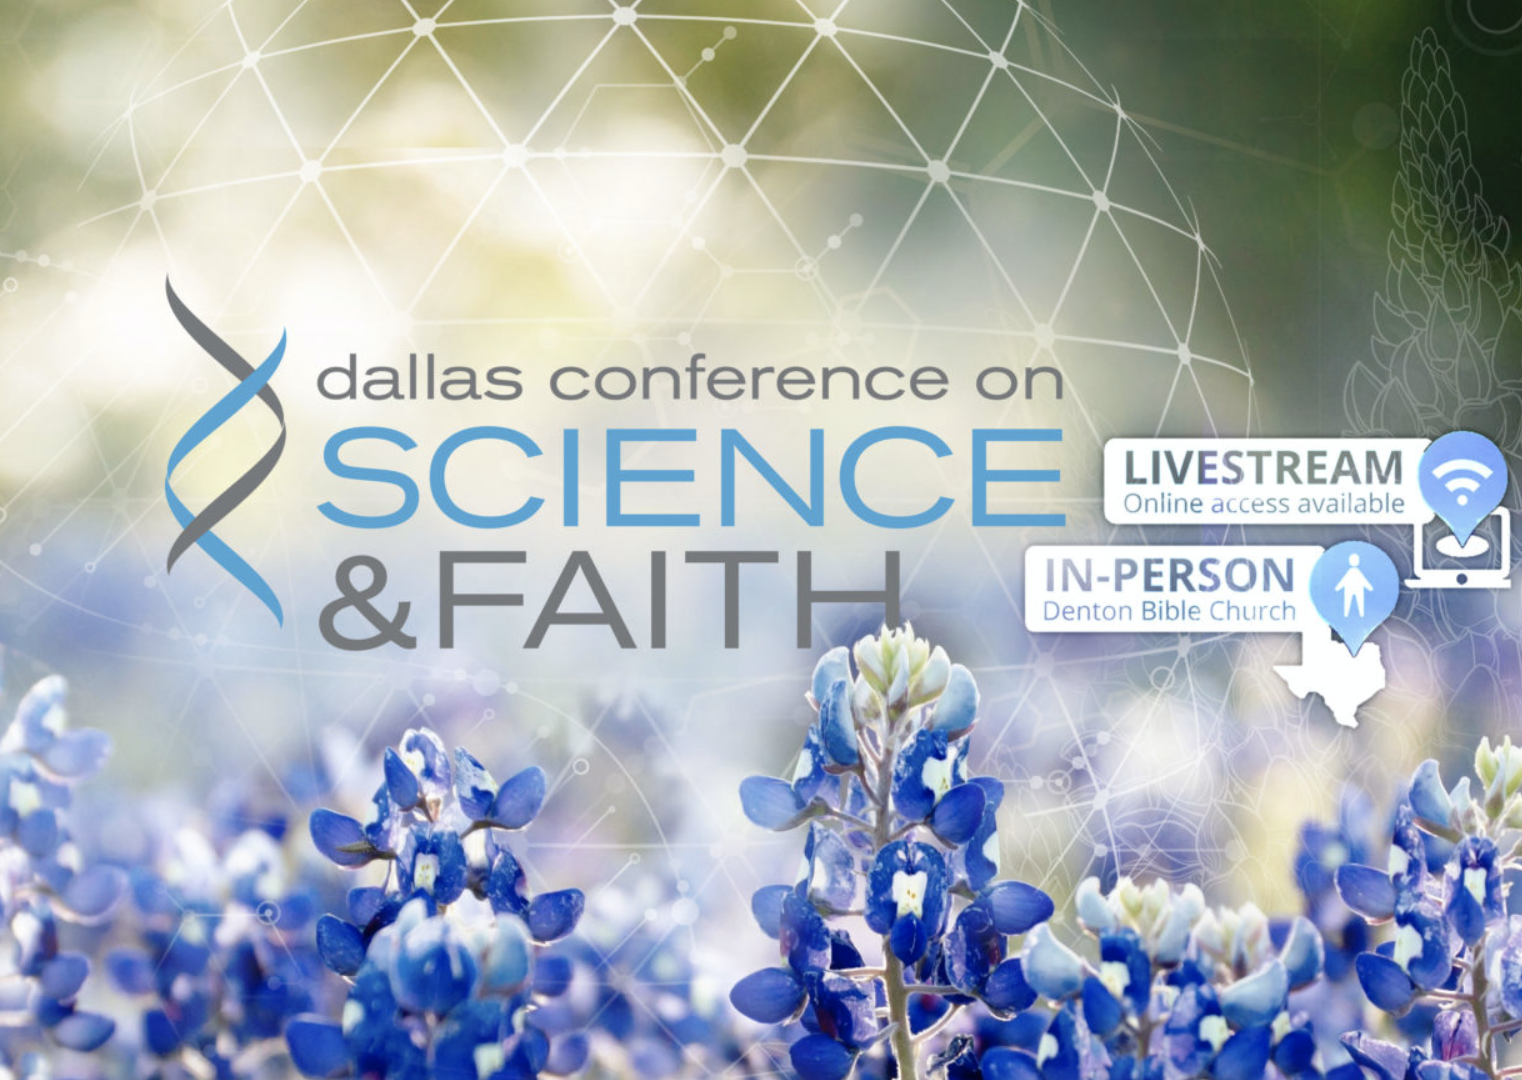 Dallas Conference on Science & Faith